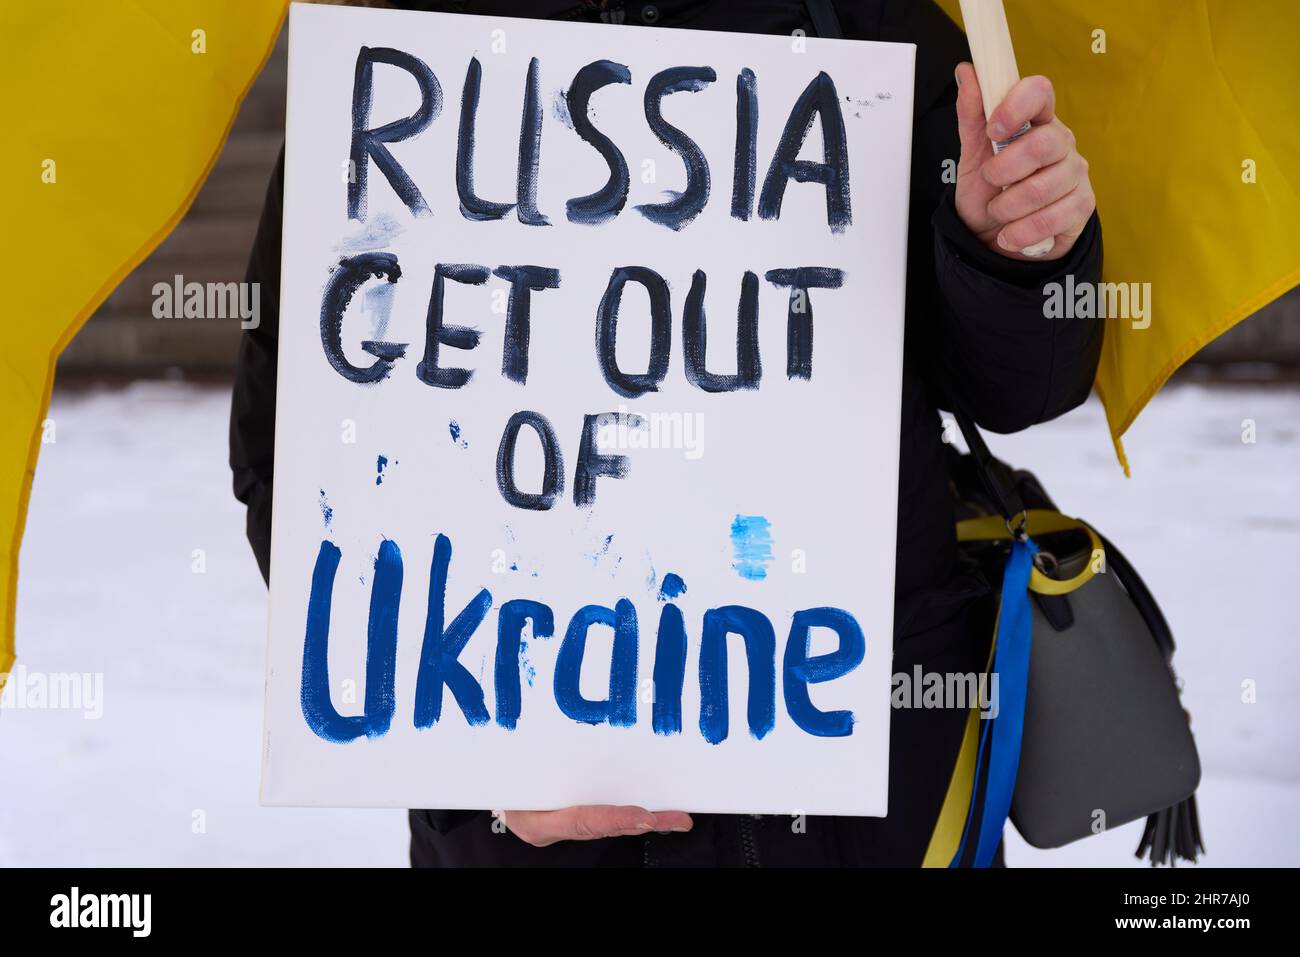 Helsinki, Finland - February 22, 2022: Demonstrator sign demanding Russia Get Out of Ukraine in a rally against Russia’s military actions and occupati Stock Photo